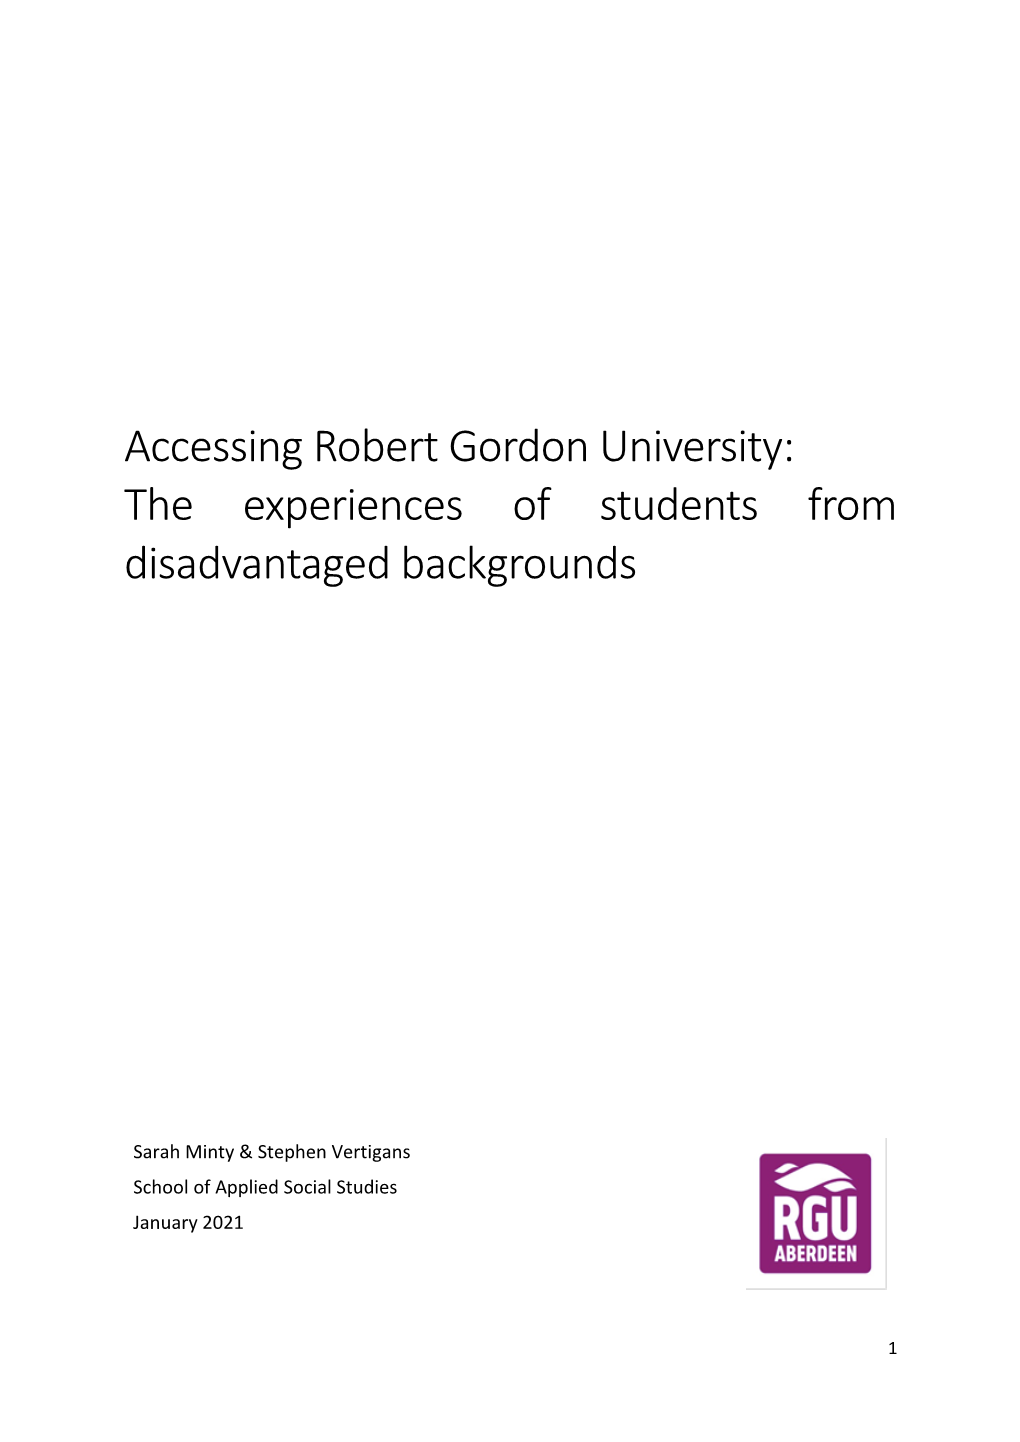 The Experiences of Students from Disadvantaged Backgrounds